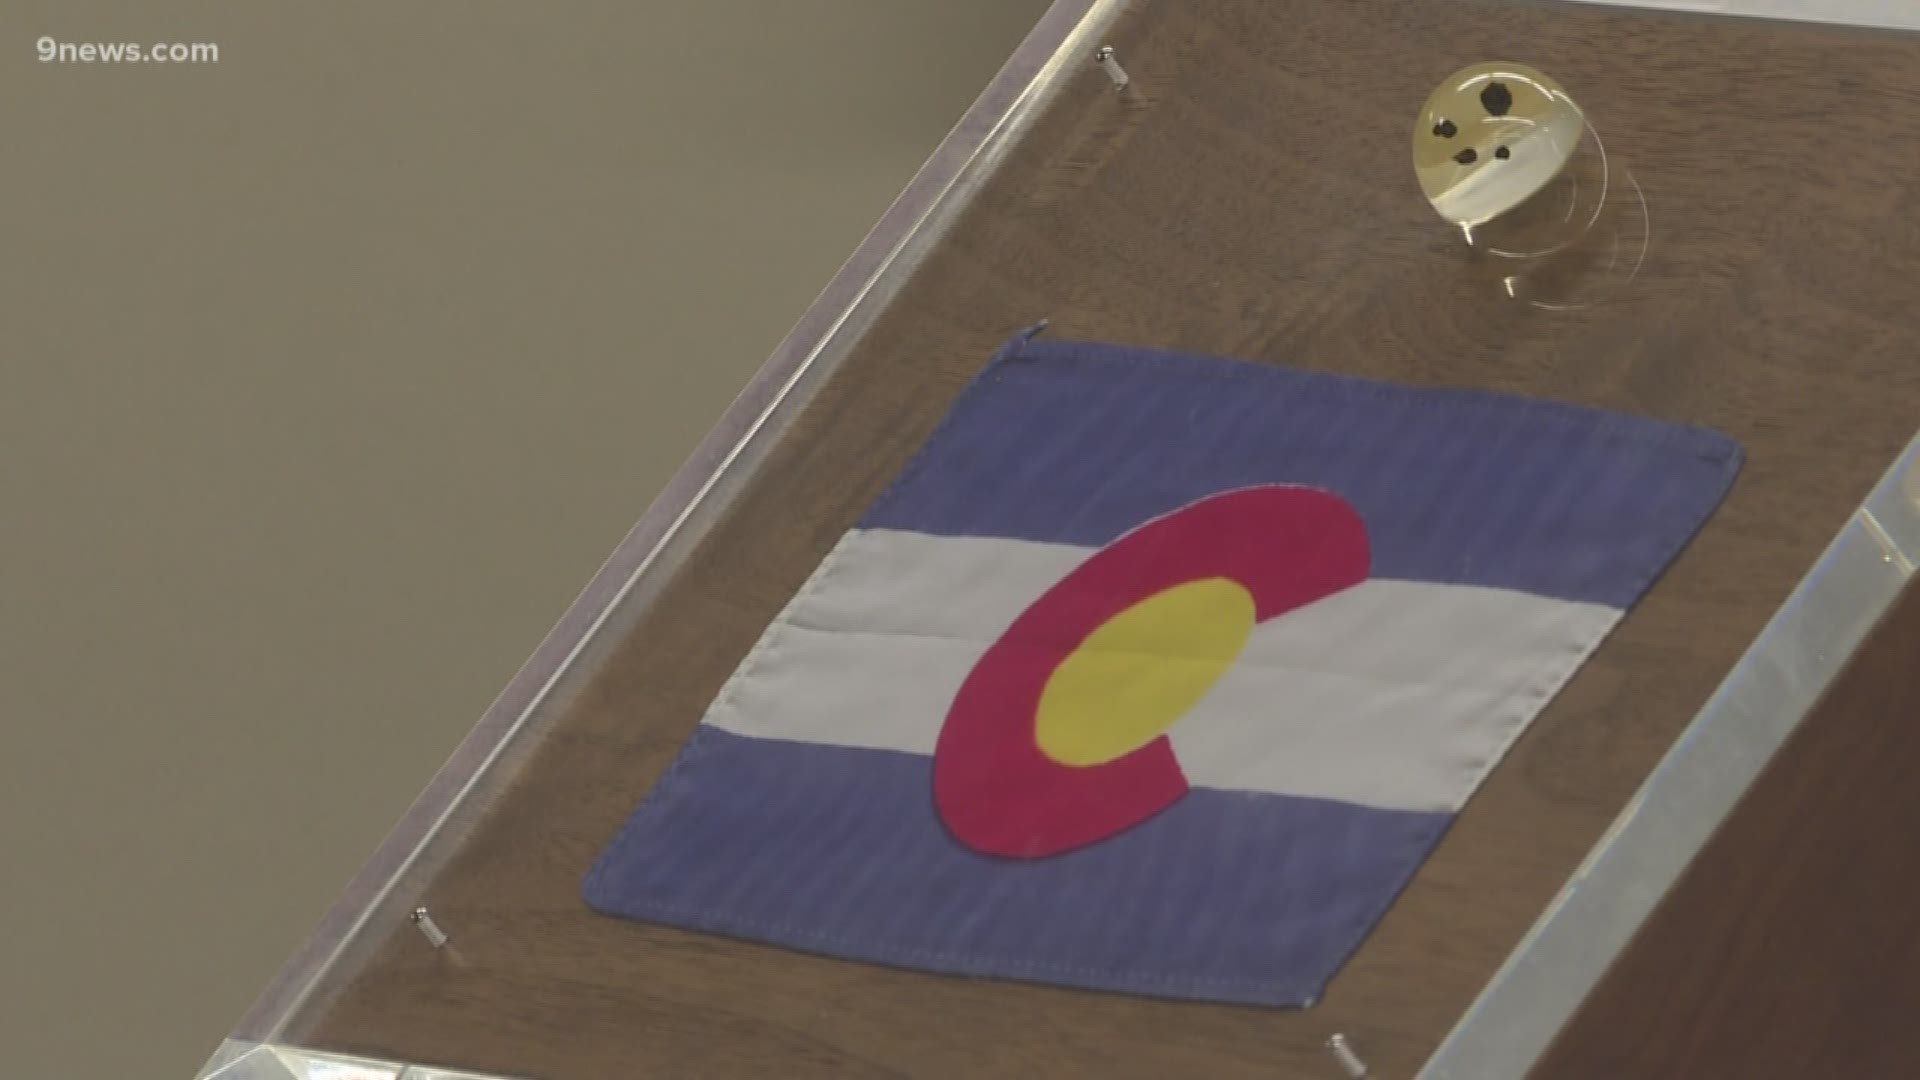 The Colorado flag that Neil Armstrong took to the moon on the Apollo 11 mission is now back in the state and out on display.